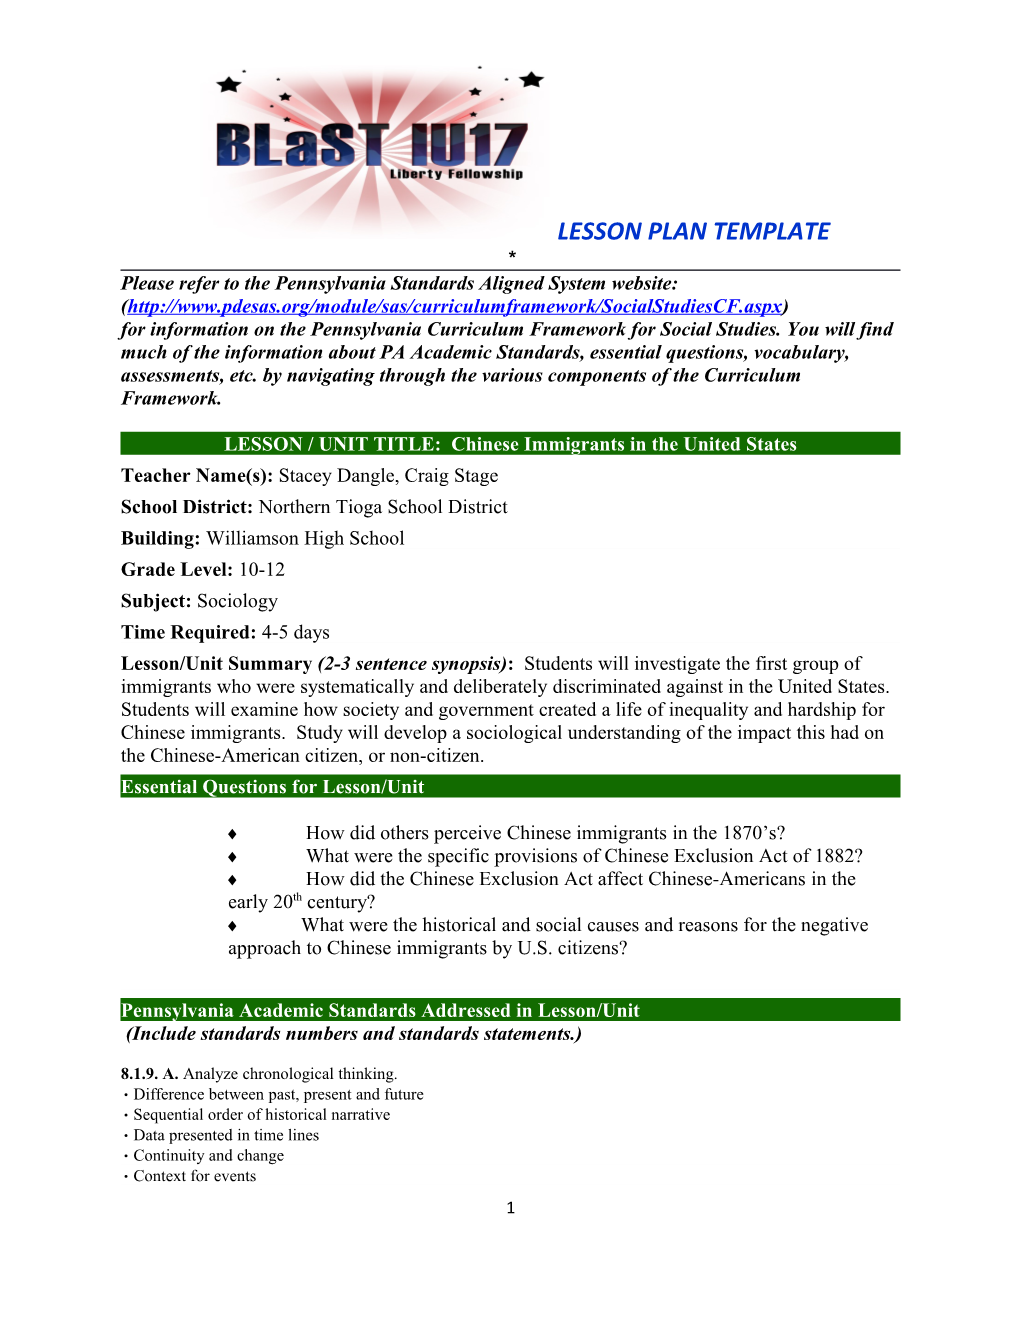 Lesson Plan Template s15